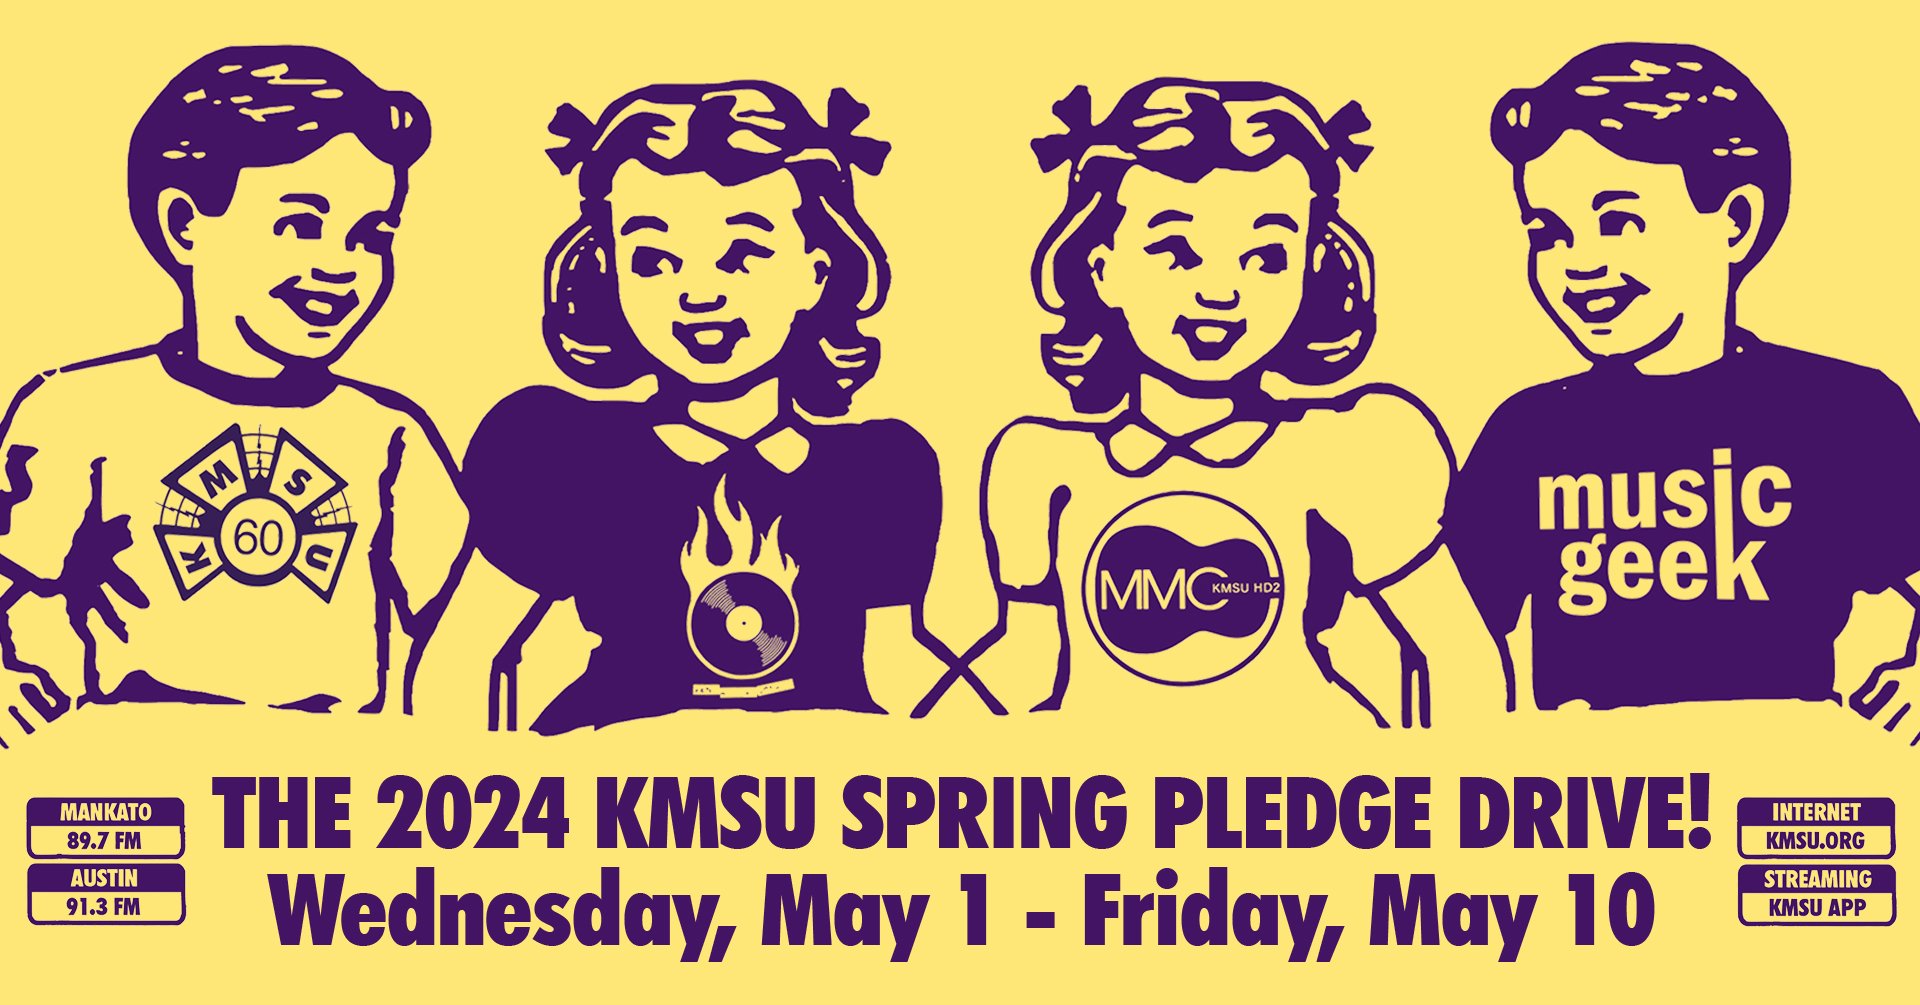 Clip art of four children wearing KMSU shirts announcing the start of the Spring Pledge Drive